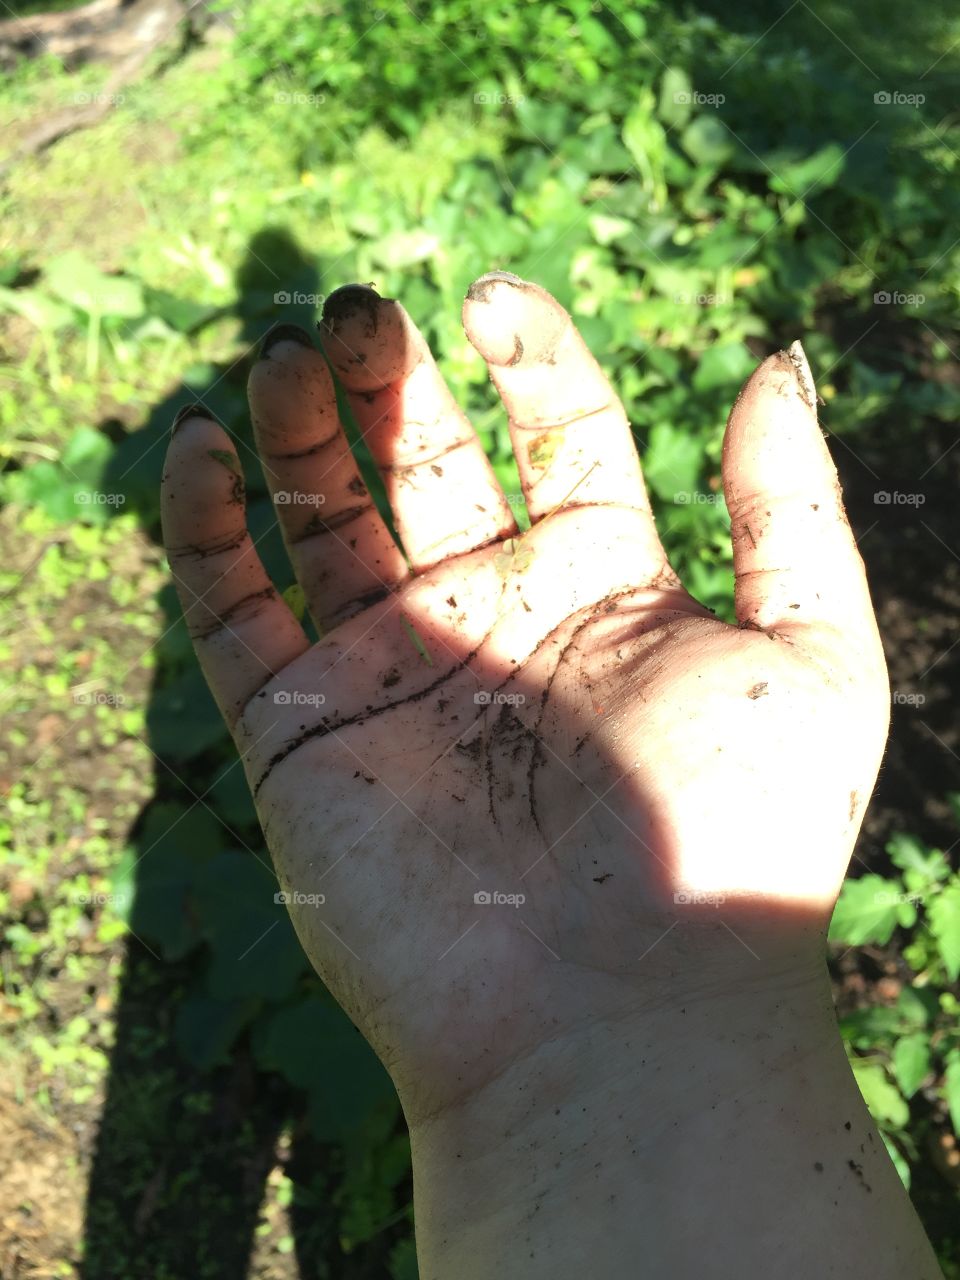 Hand covered in dirt from gardening. 